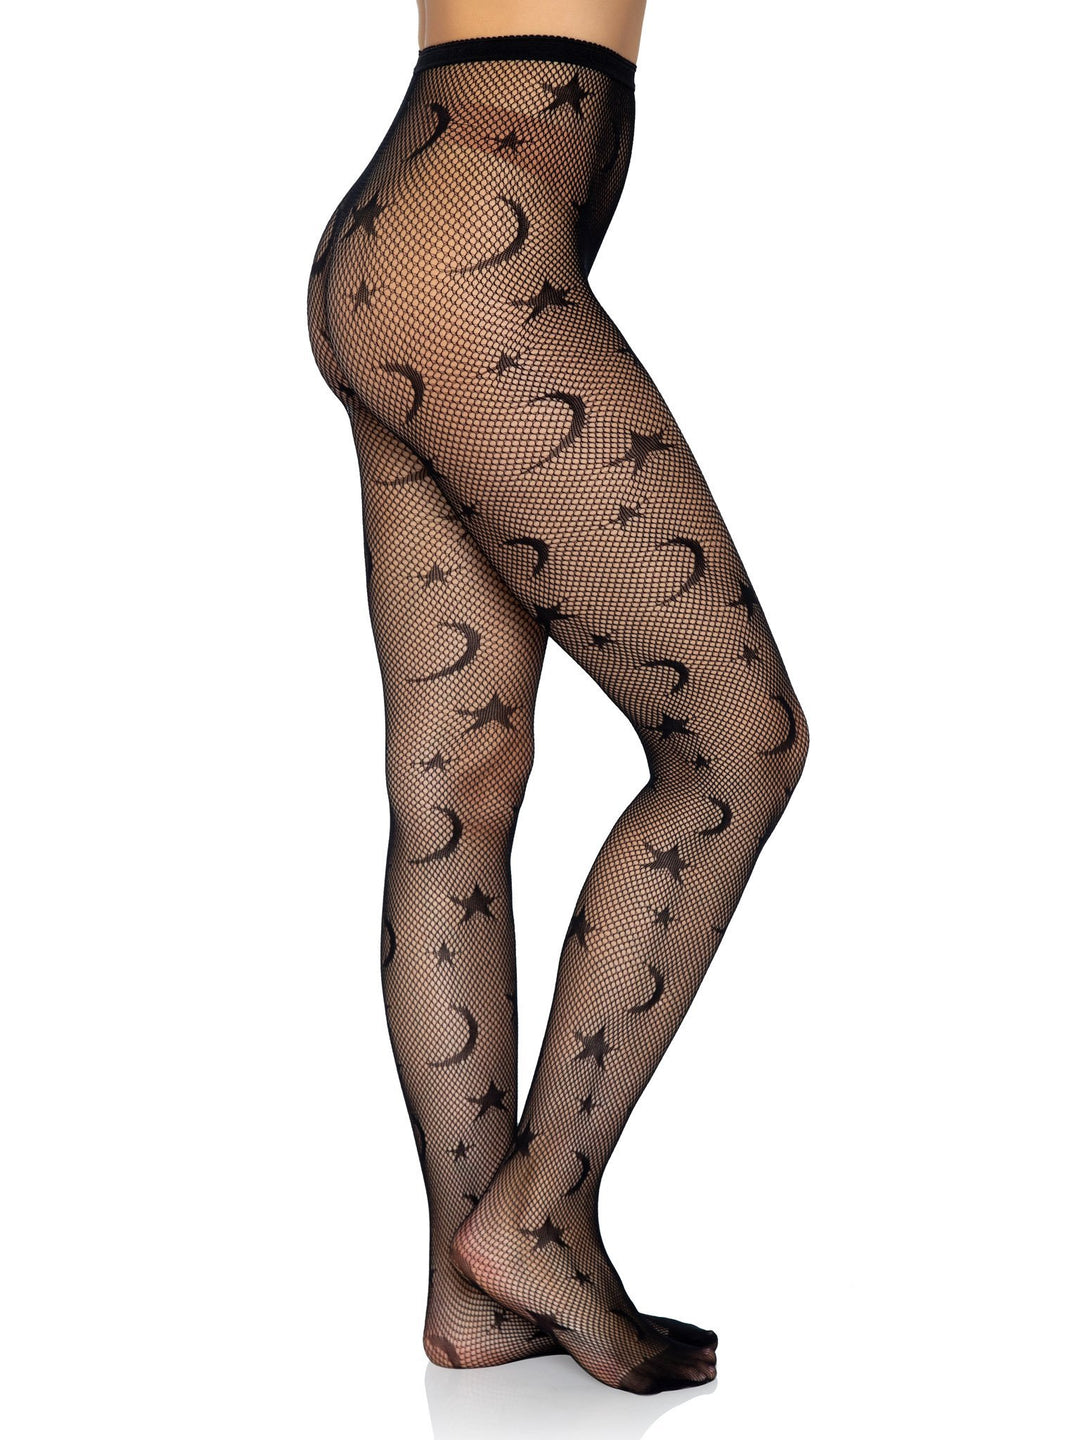 Black Fishnet Pantyhose with Moons and Stars Details